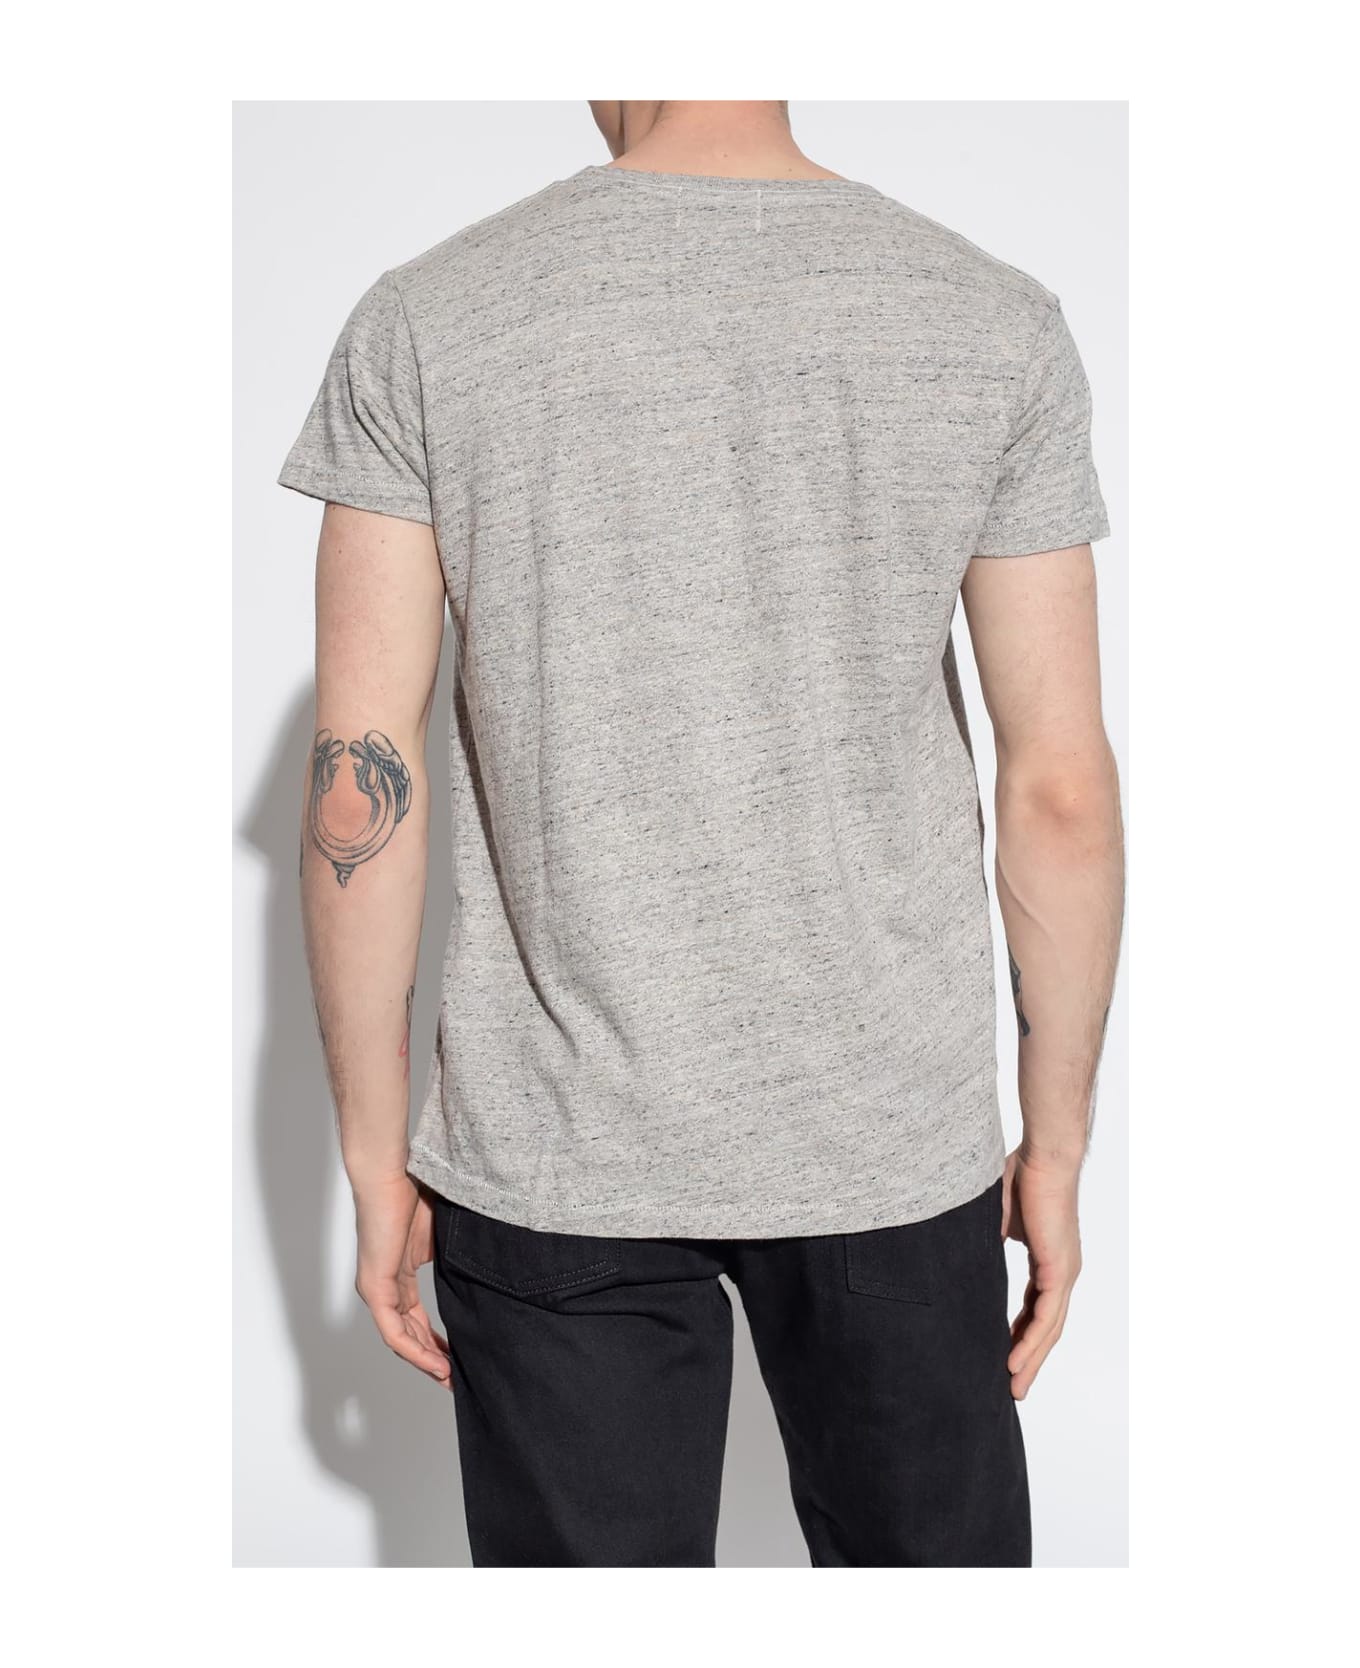 Levi's T-shirt 'vintage Clothing®' Collection - Grey